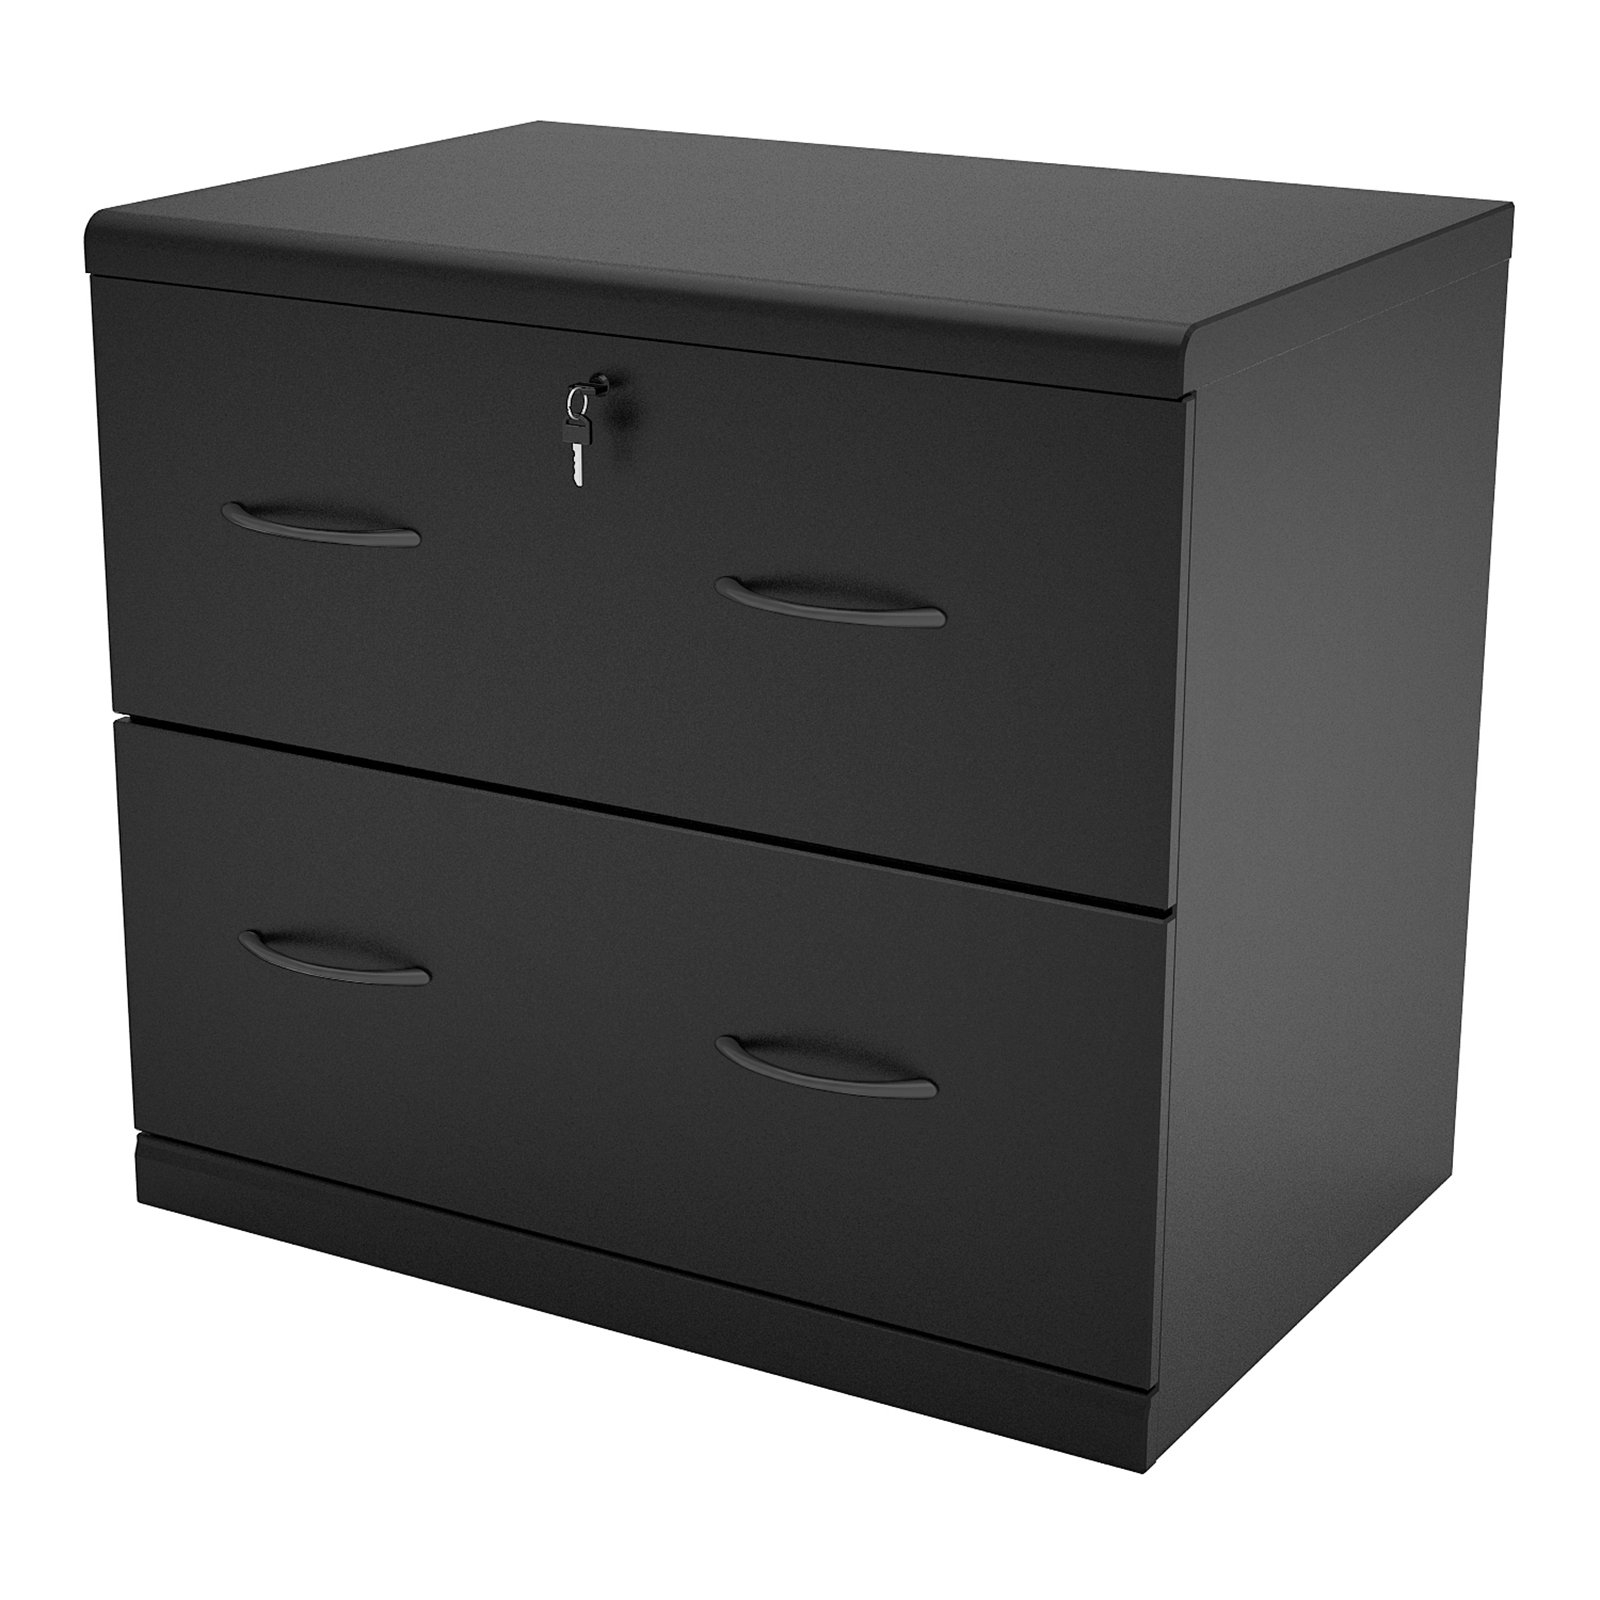 2 Drawer Lateral Wood Lockable Filing Cabinet Black Walmart in sizing 1600 X 1600